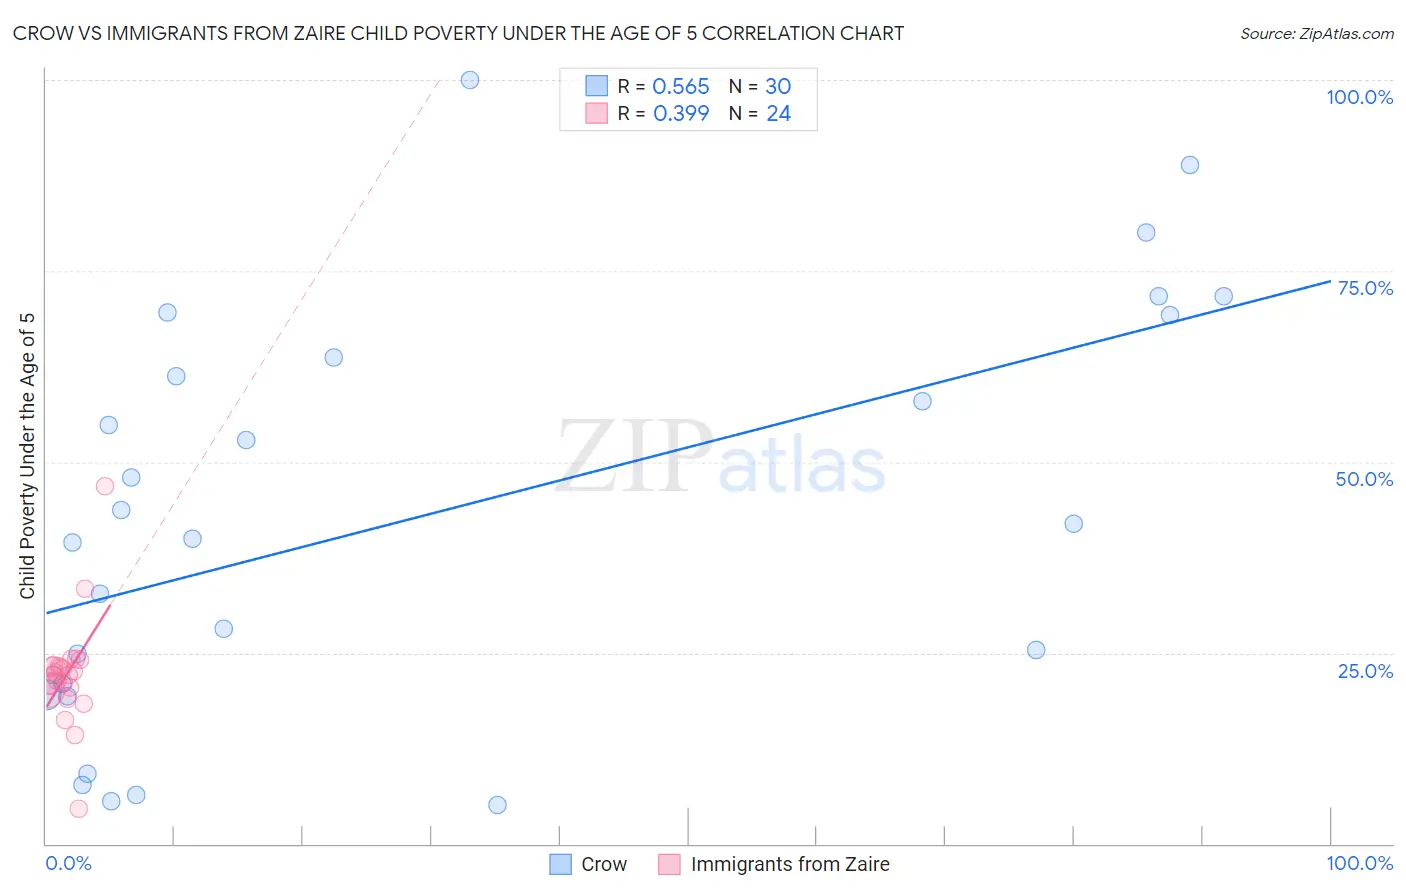 Crow vs Immigrants from Zaire Child Poverty Under the Age of 5